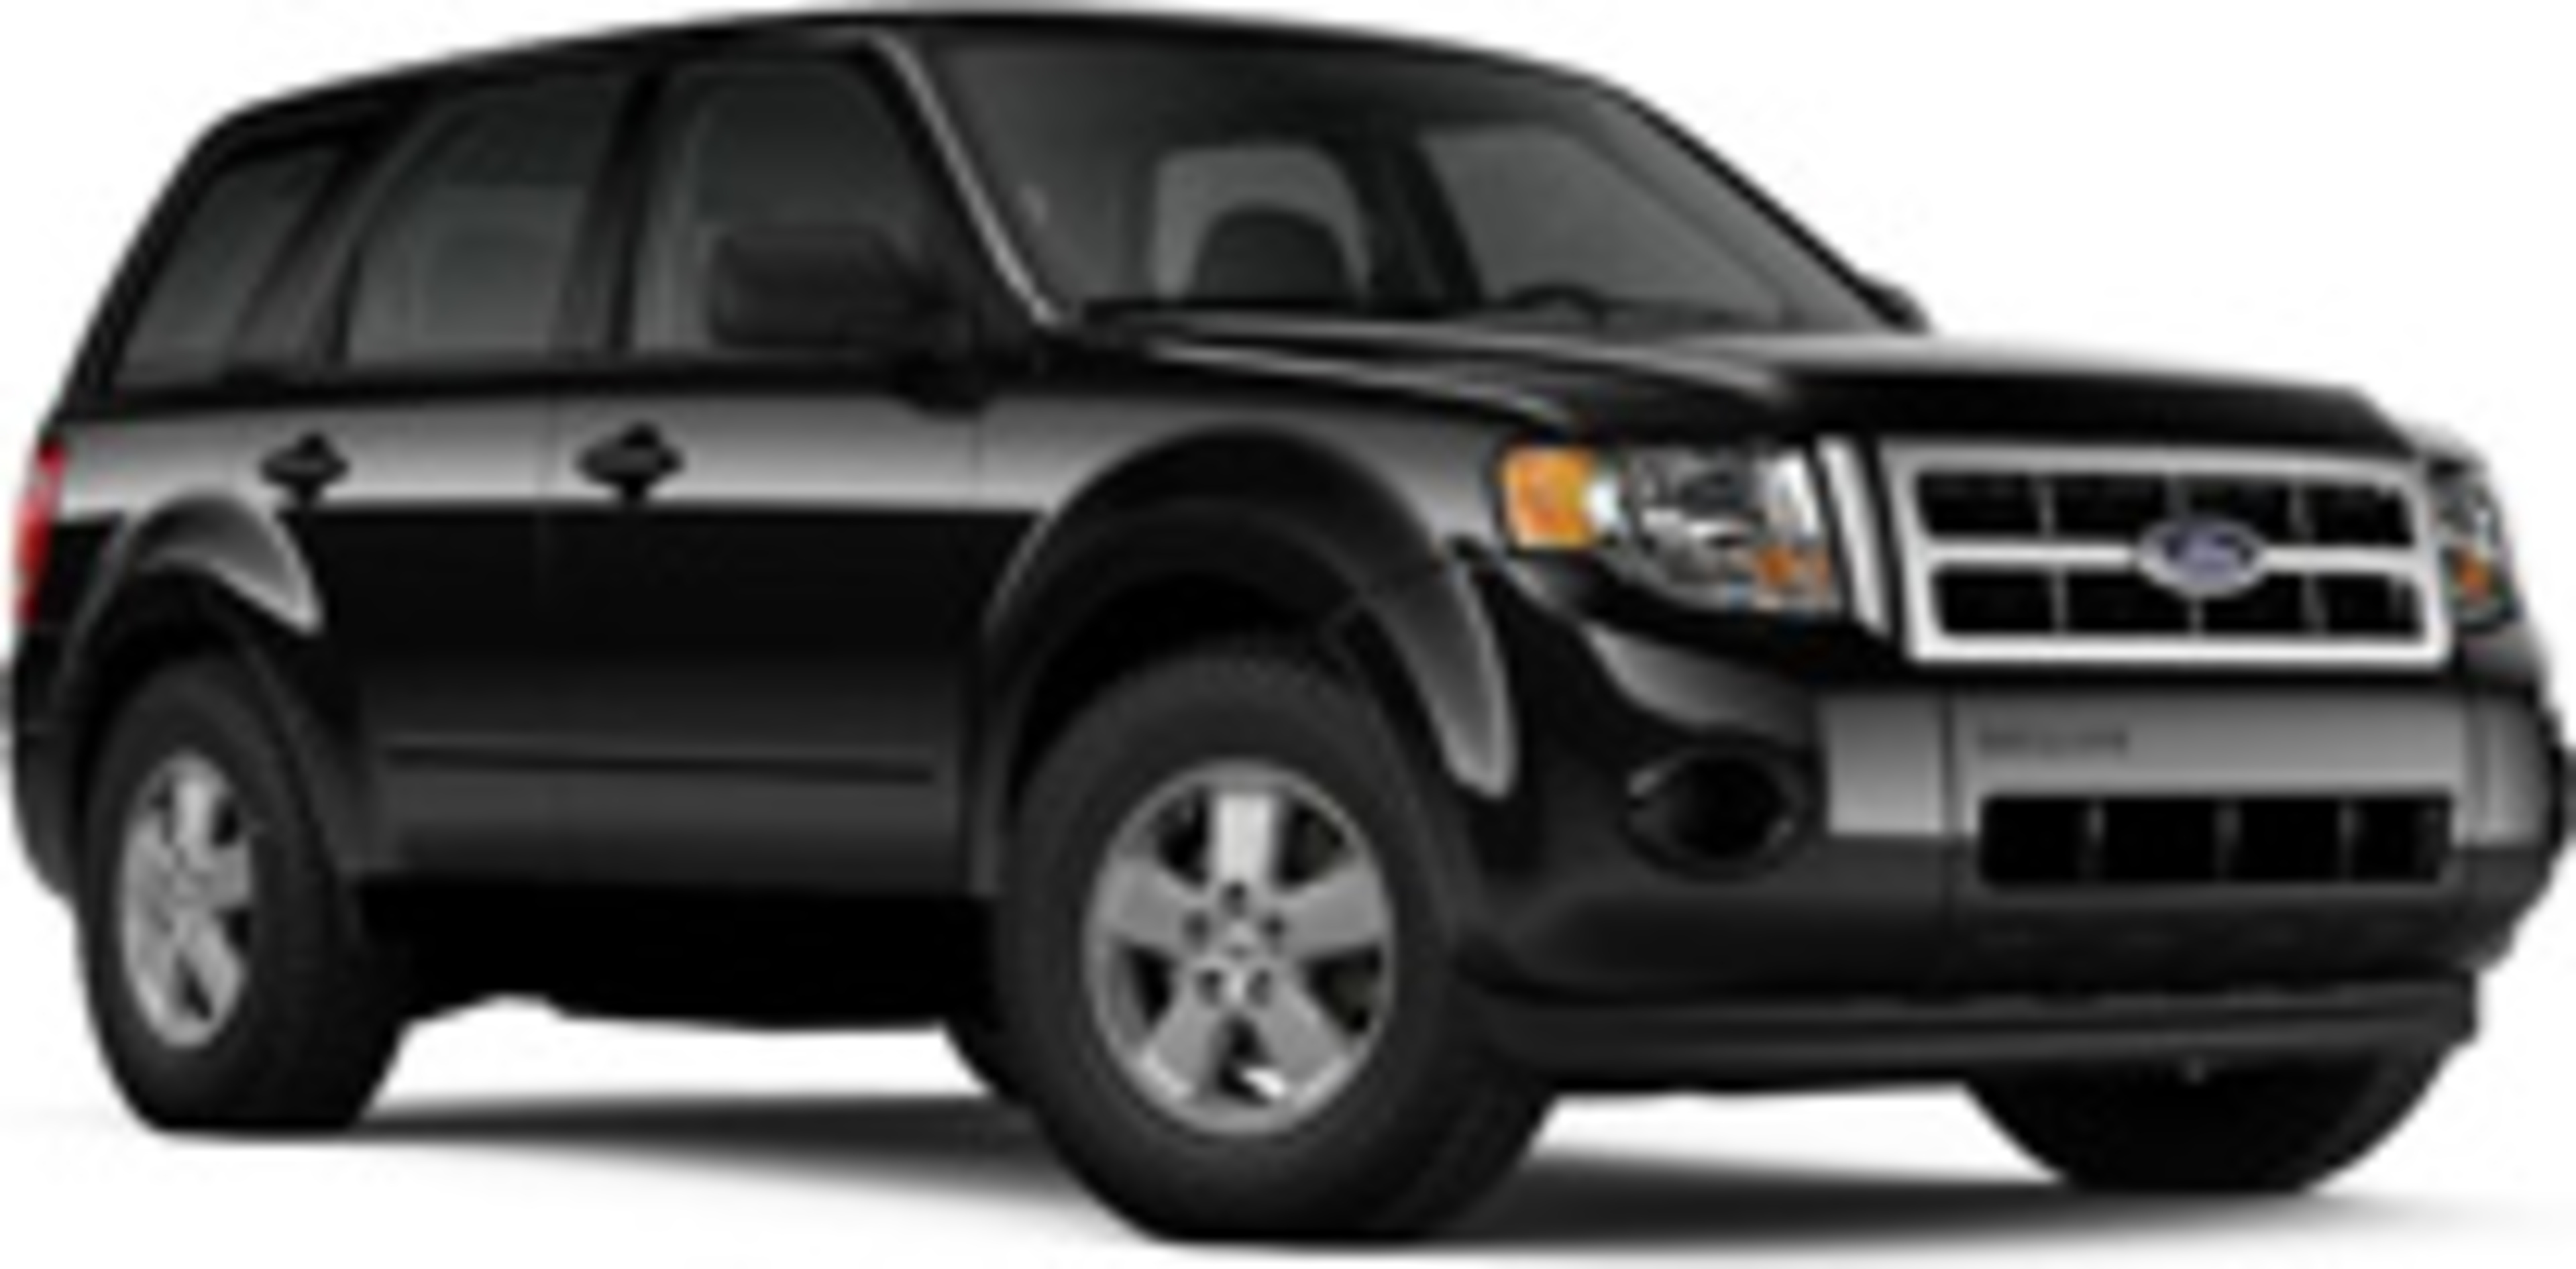 2011 Ford Escape Service and Repair Manual